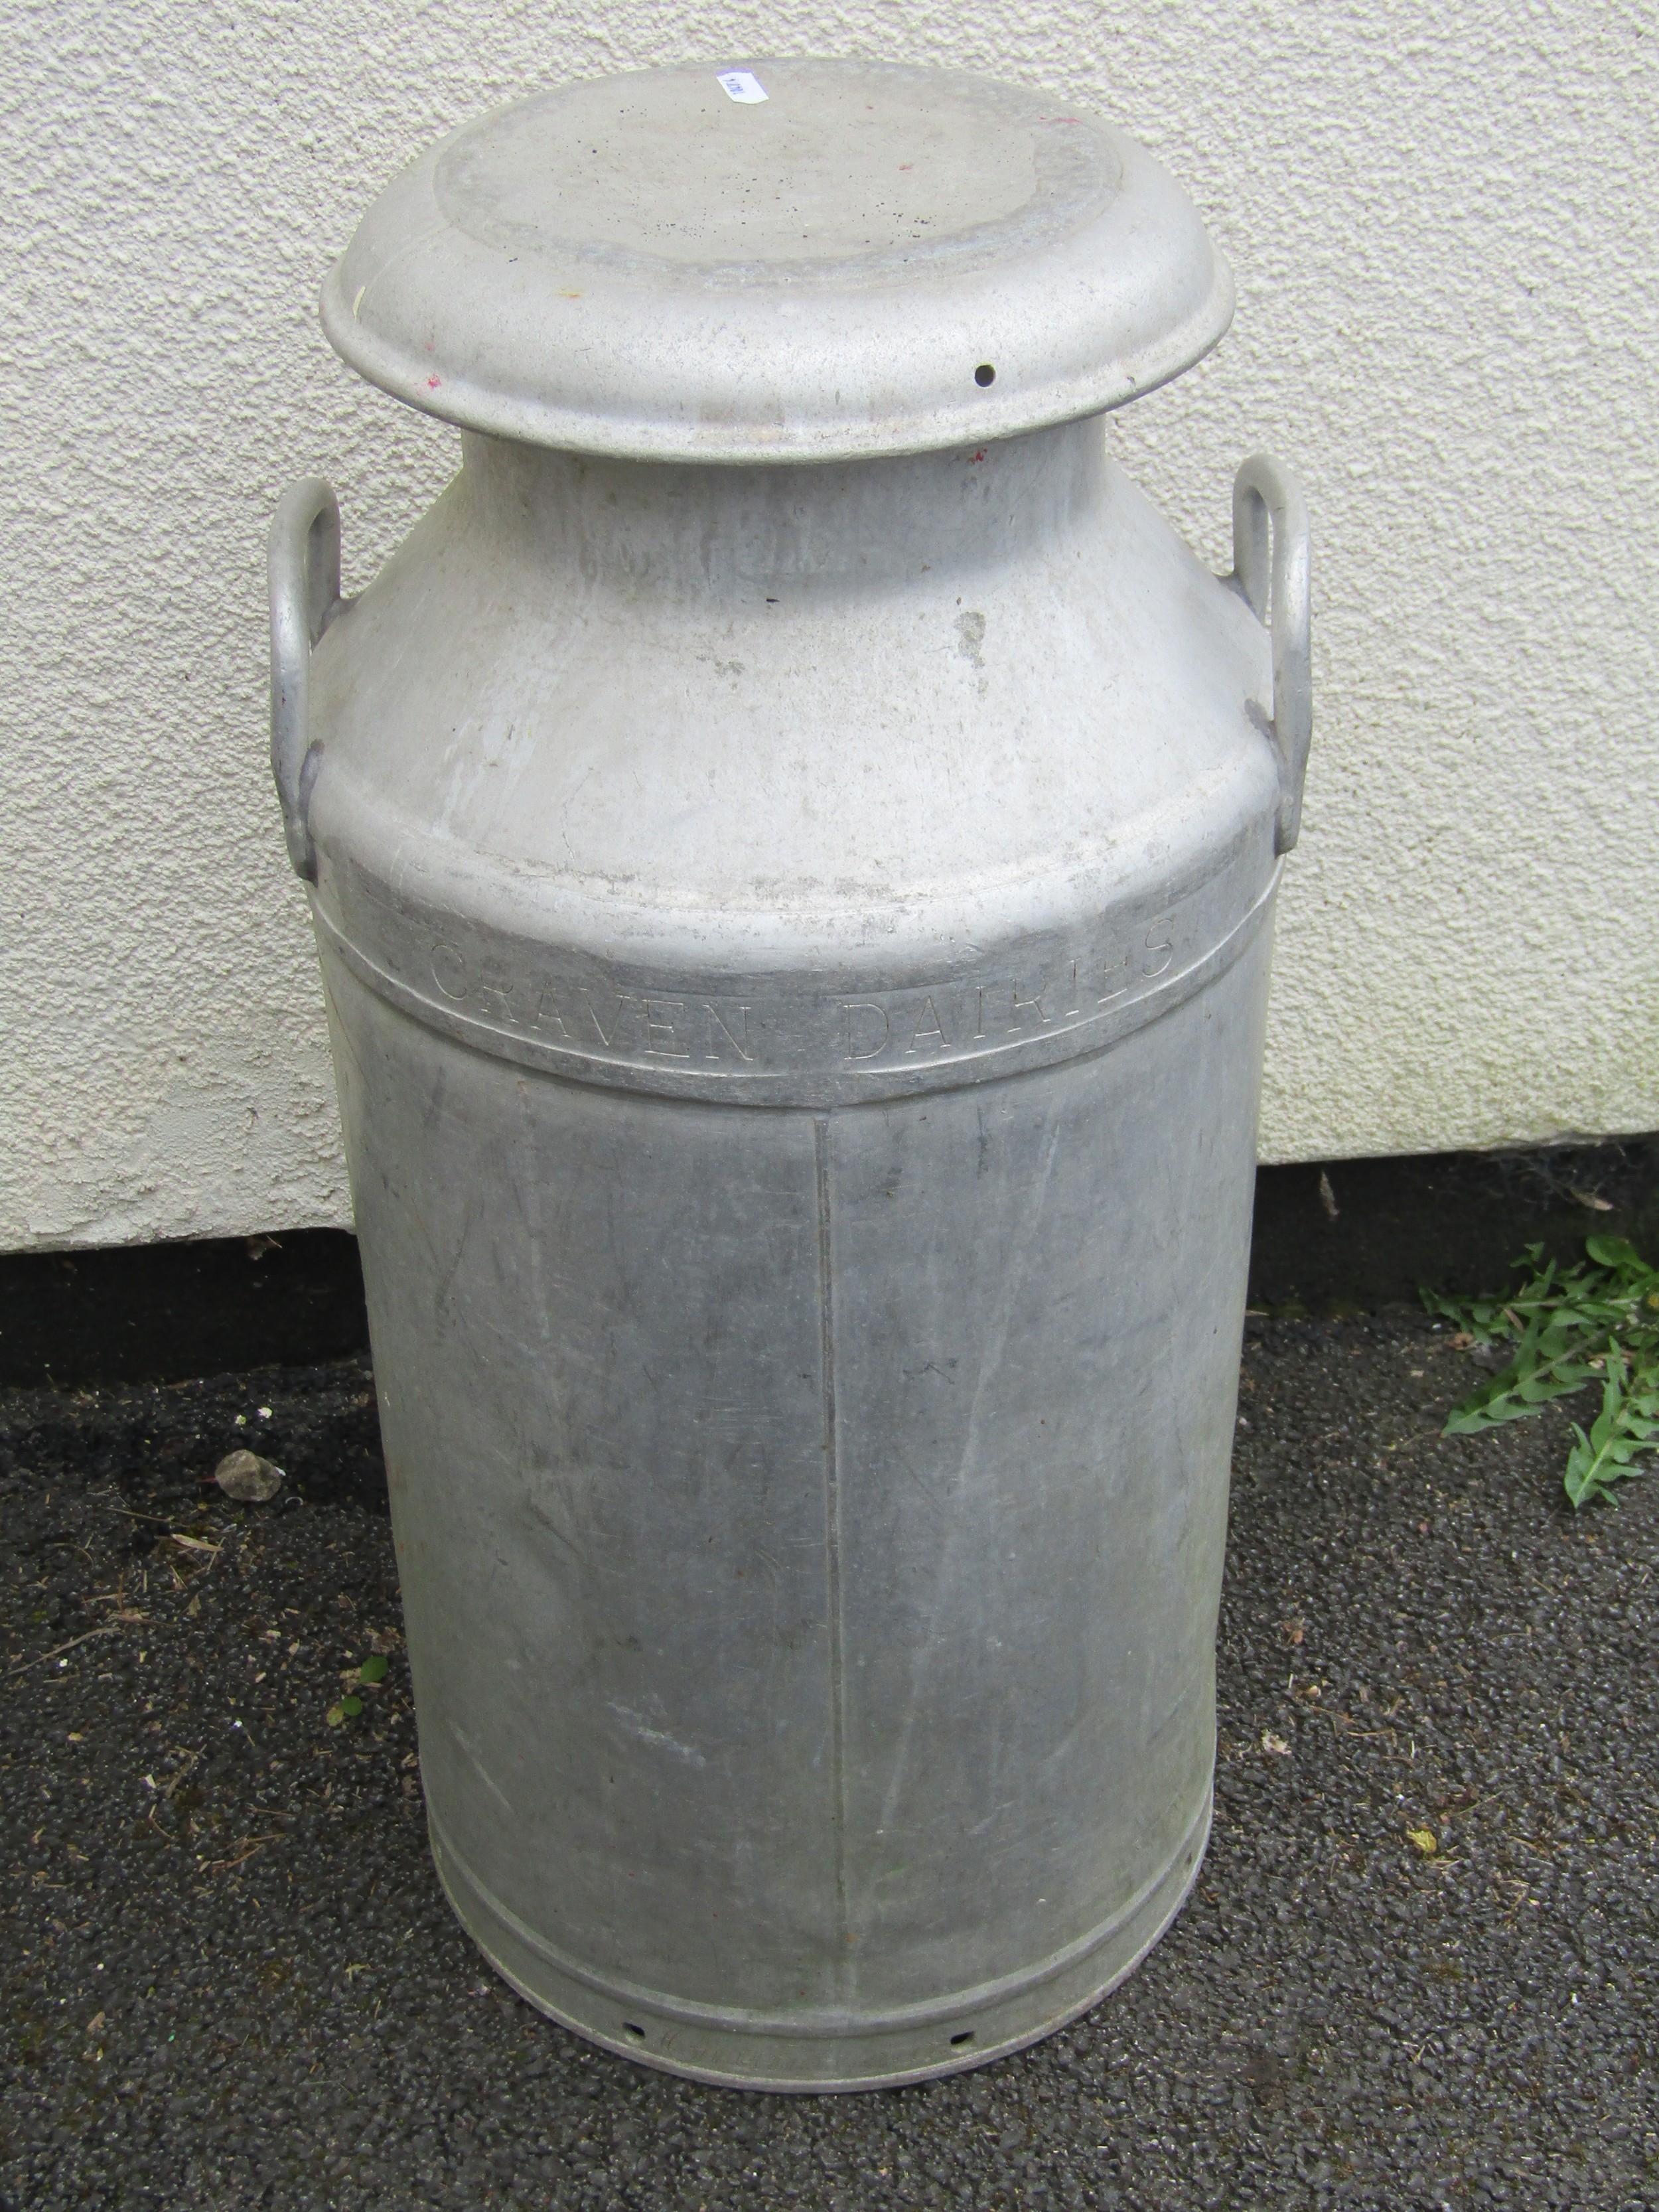 A Grundycan Excraven Dairies, Leeds aluminium two handled milk churn (complete with cap), 72 cm high - Image 2 of 5